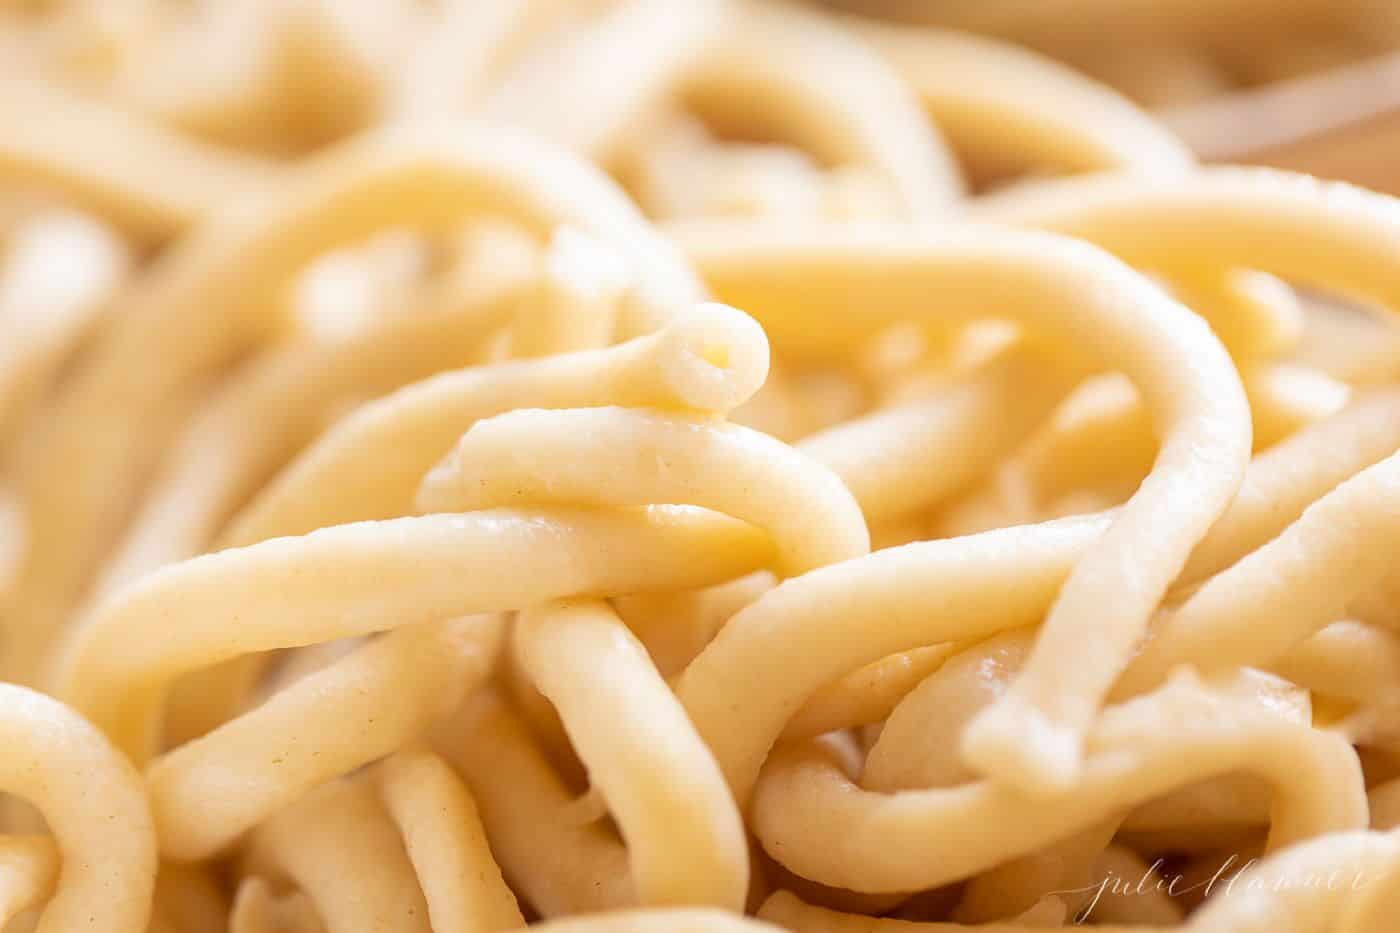 Close up of bucatini pasta noodles.